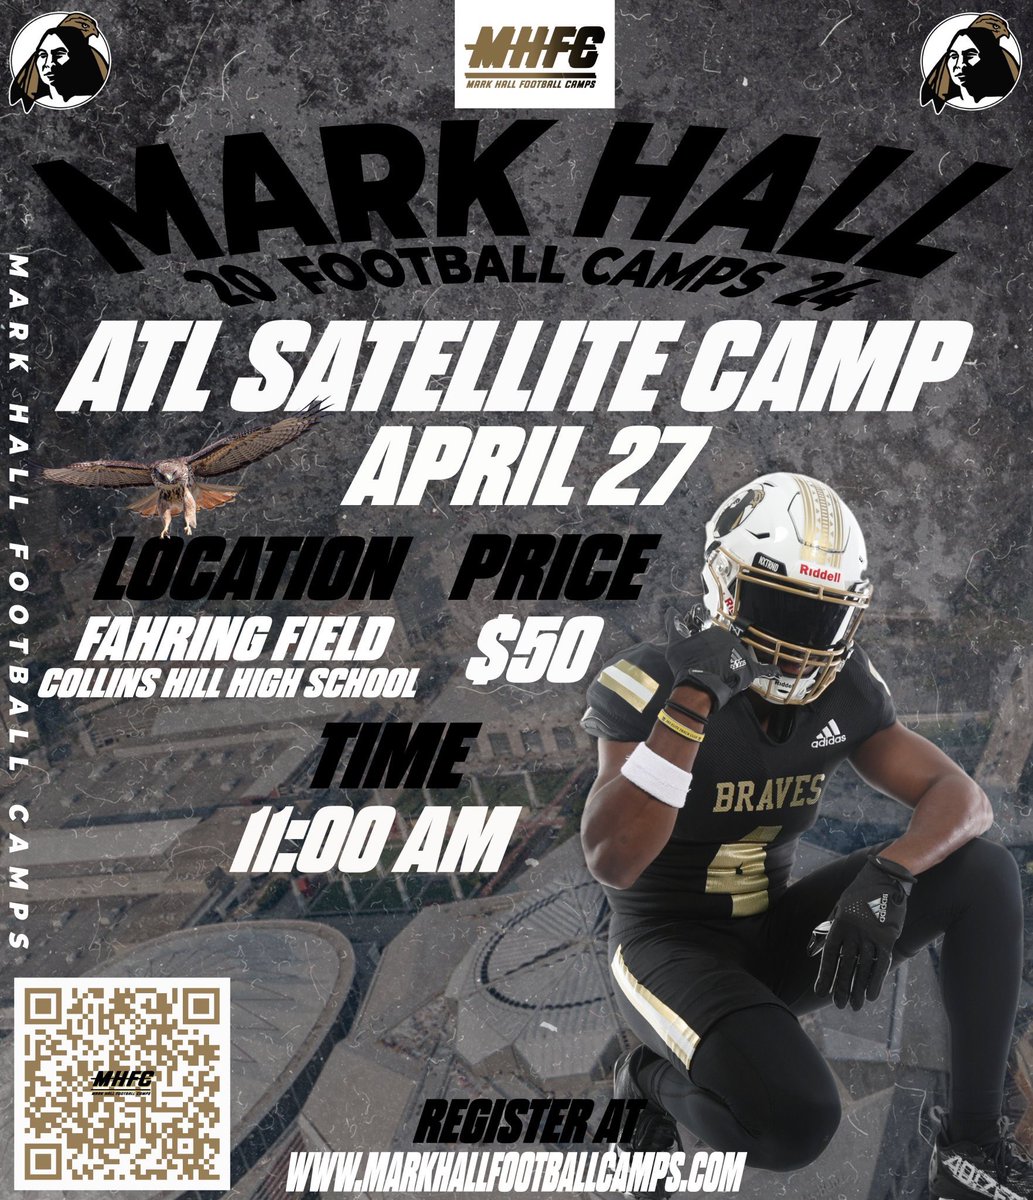 Great Opportunity To Showcase Your Talent At Mark Hall Football Camps is This Weekend. Come Compete and Earn A Scholarship! Registration 👇🏽: markhallfootballcamps.com